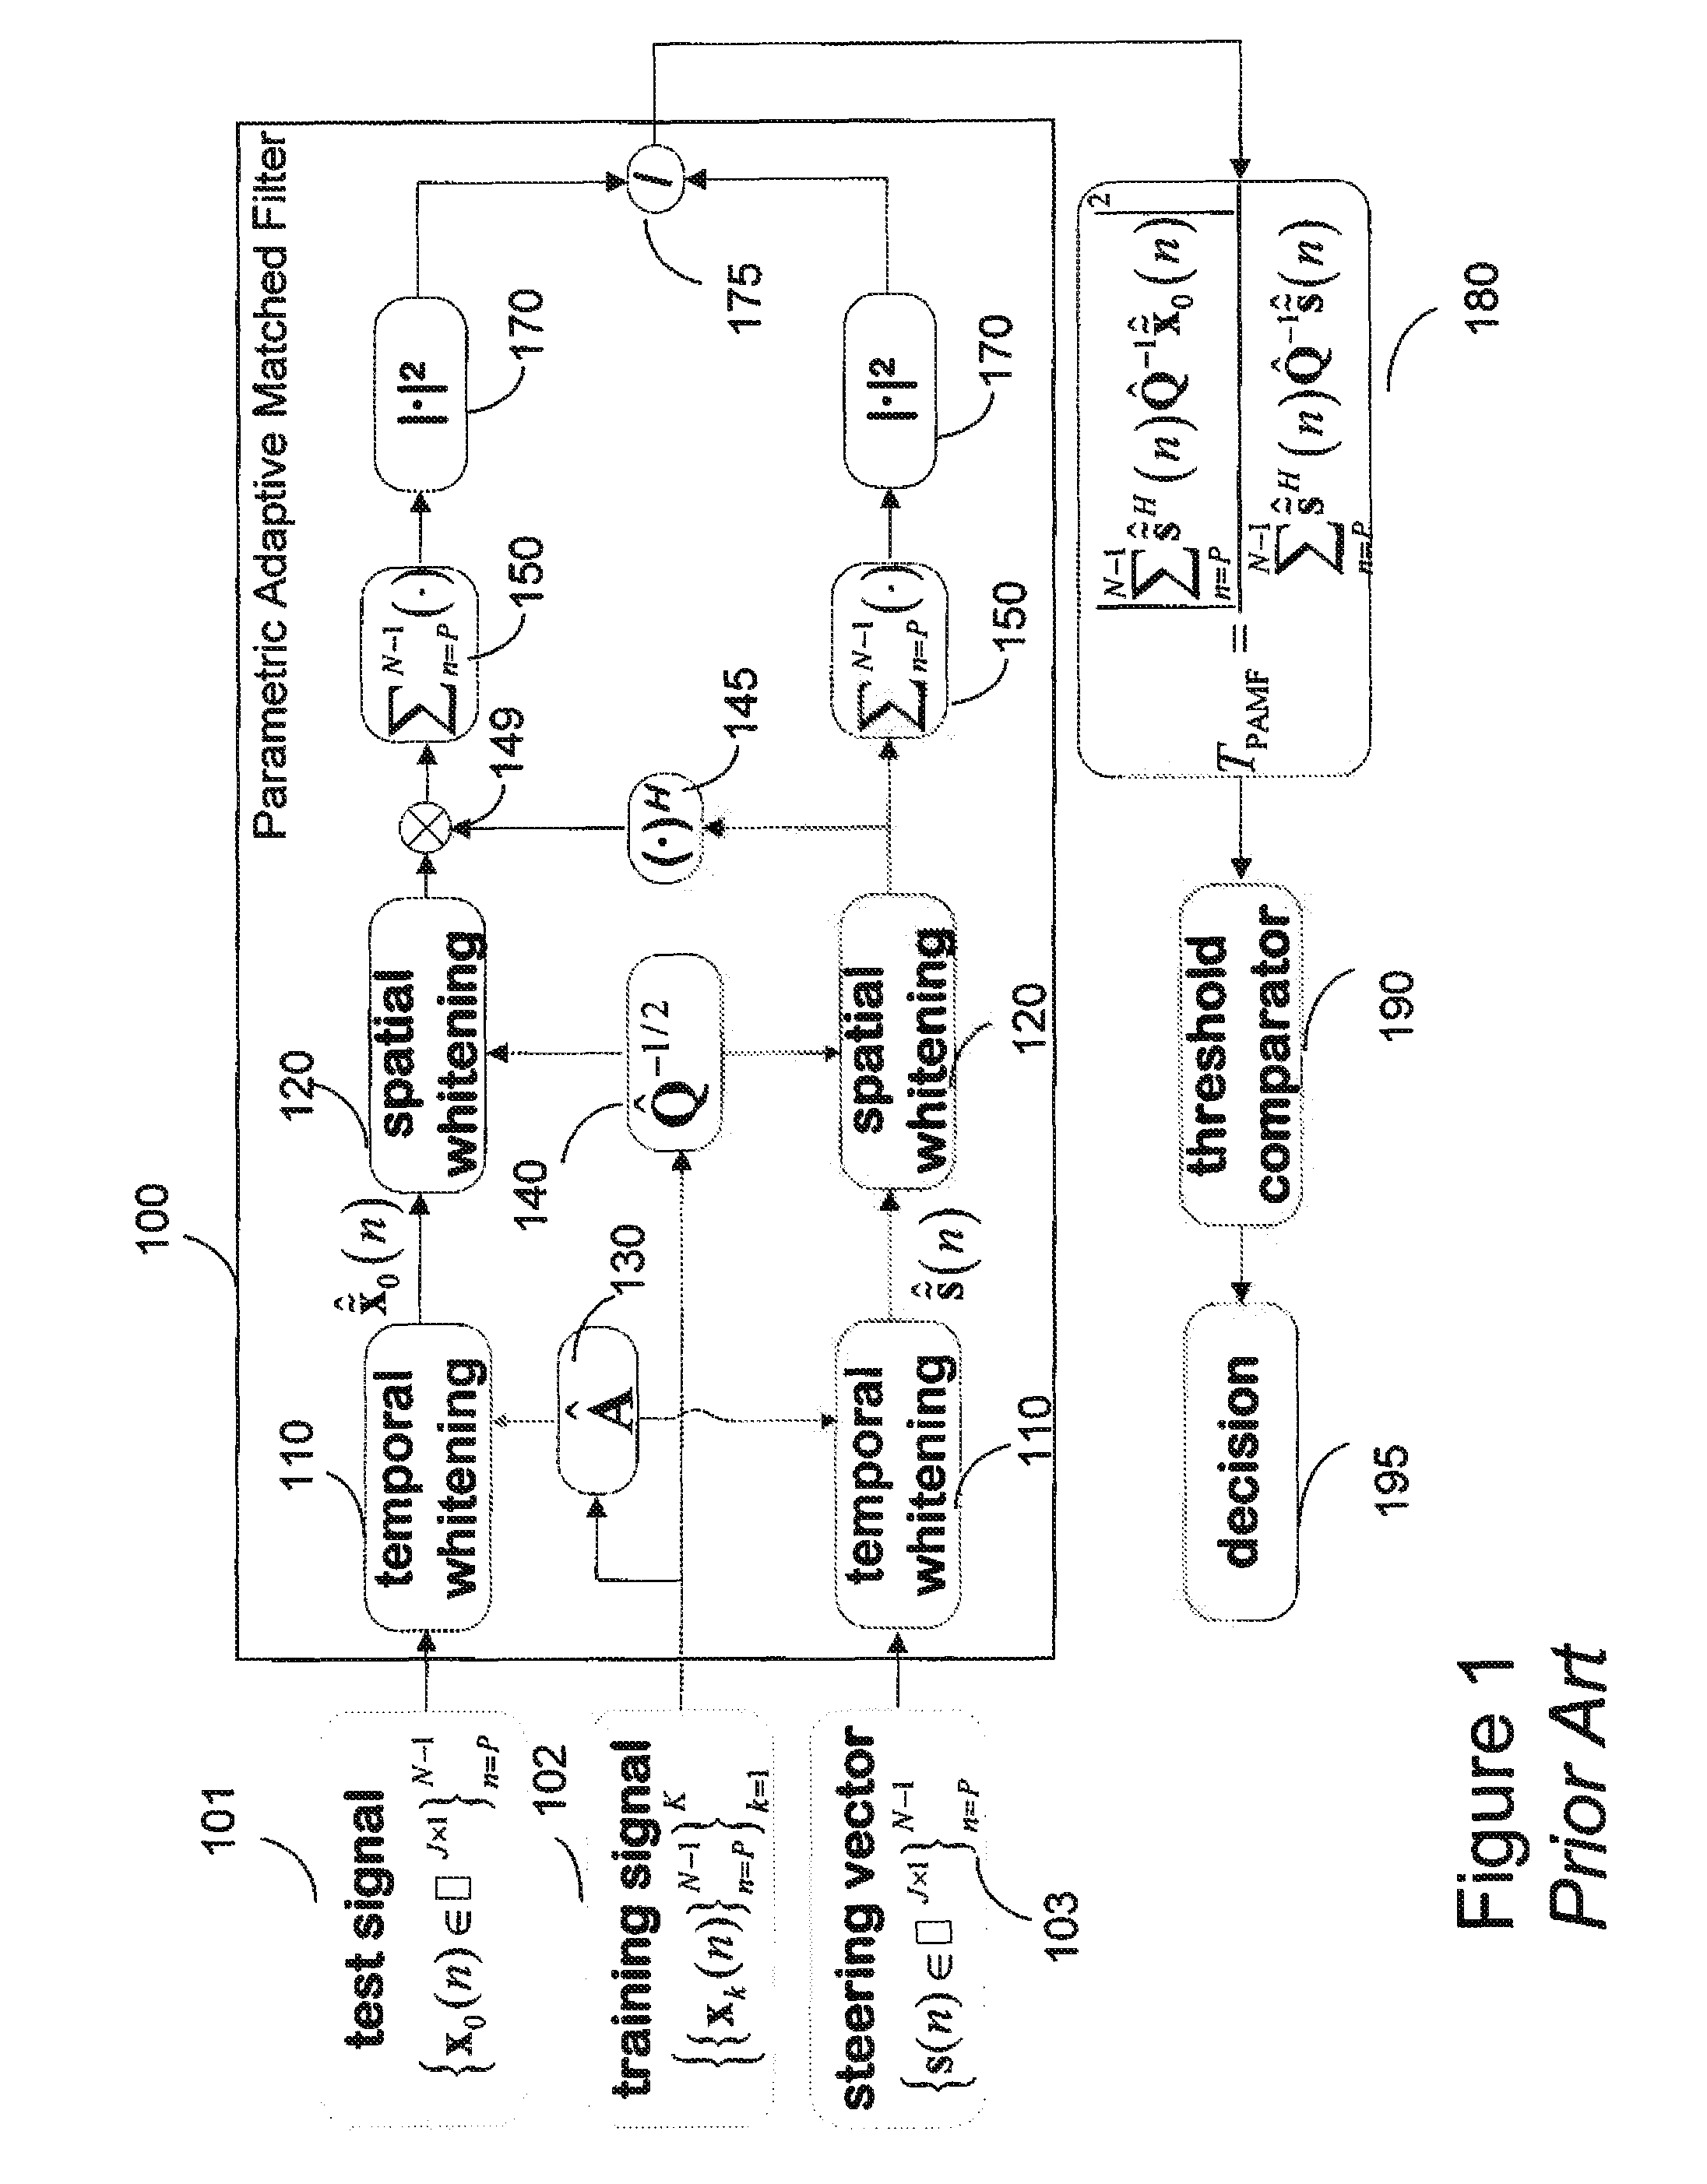 Persymmetric parametric adaptive matched filters for detecting targets using space-time adaptive processing of radar signals